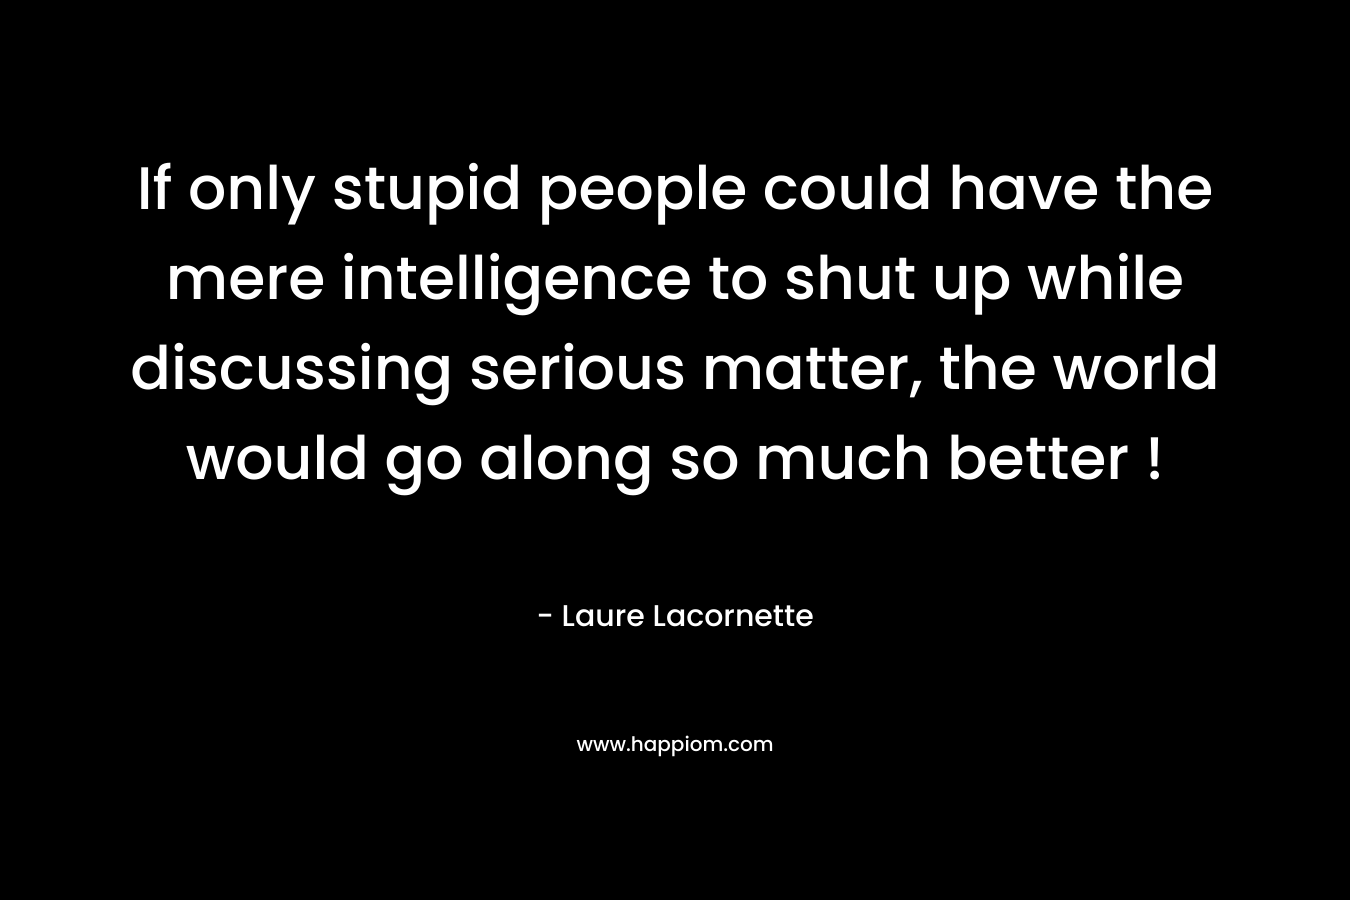 If only stupid people could have the mere intelligence to shut up while discussing serious matter, the world would go along so much better !